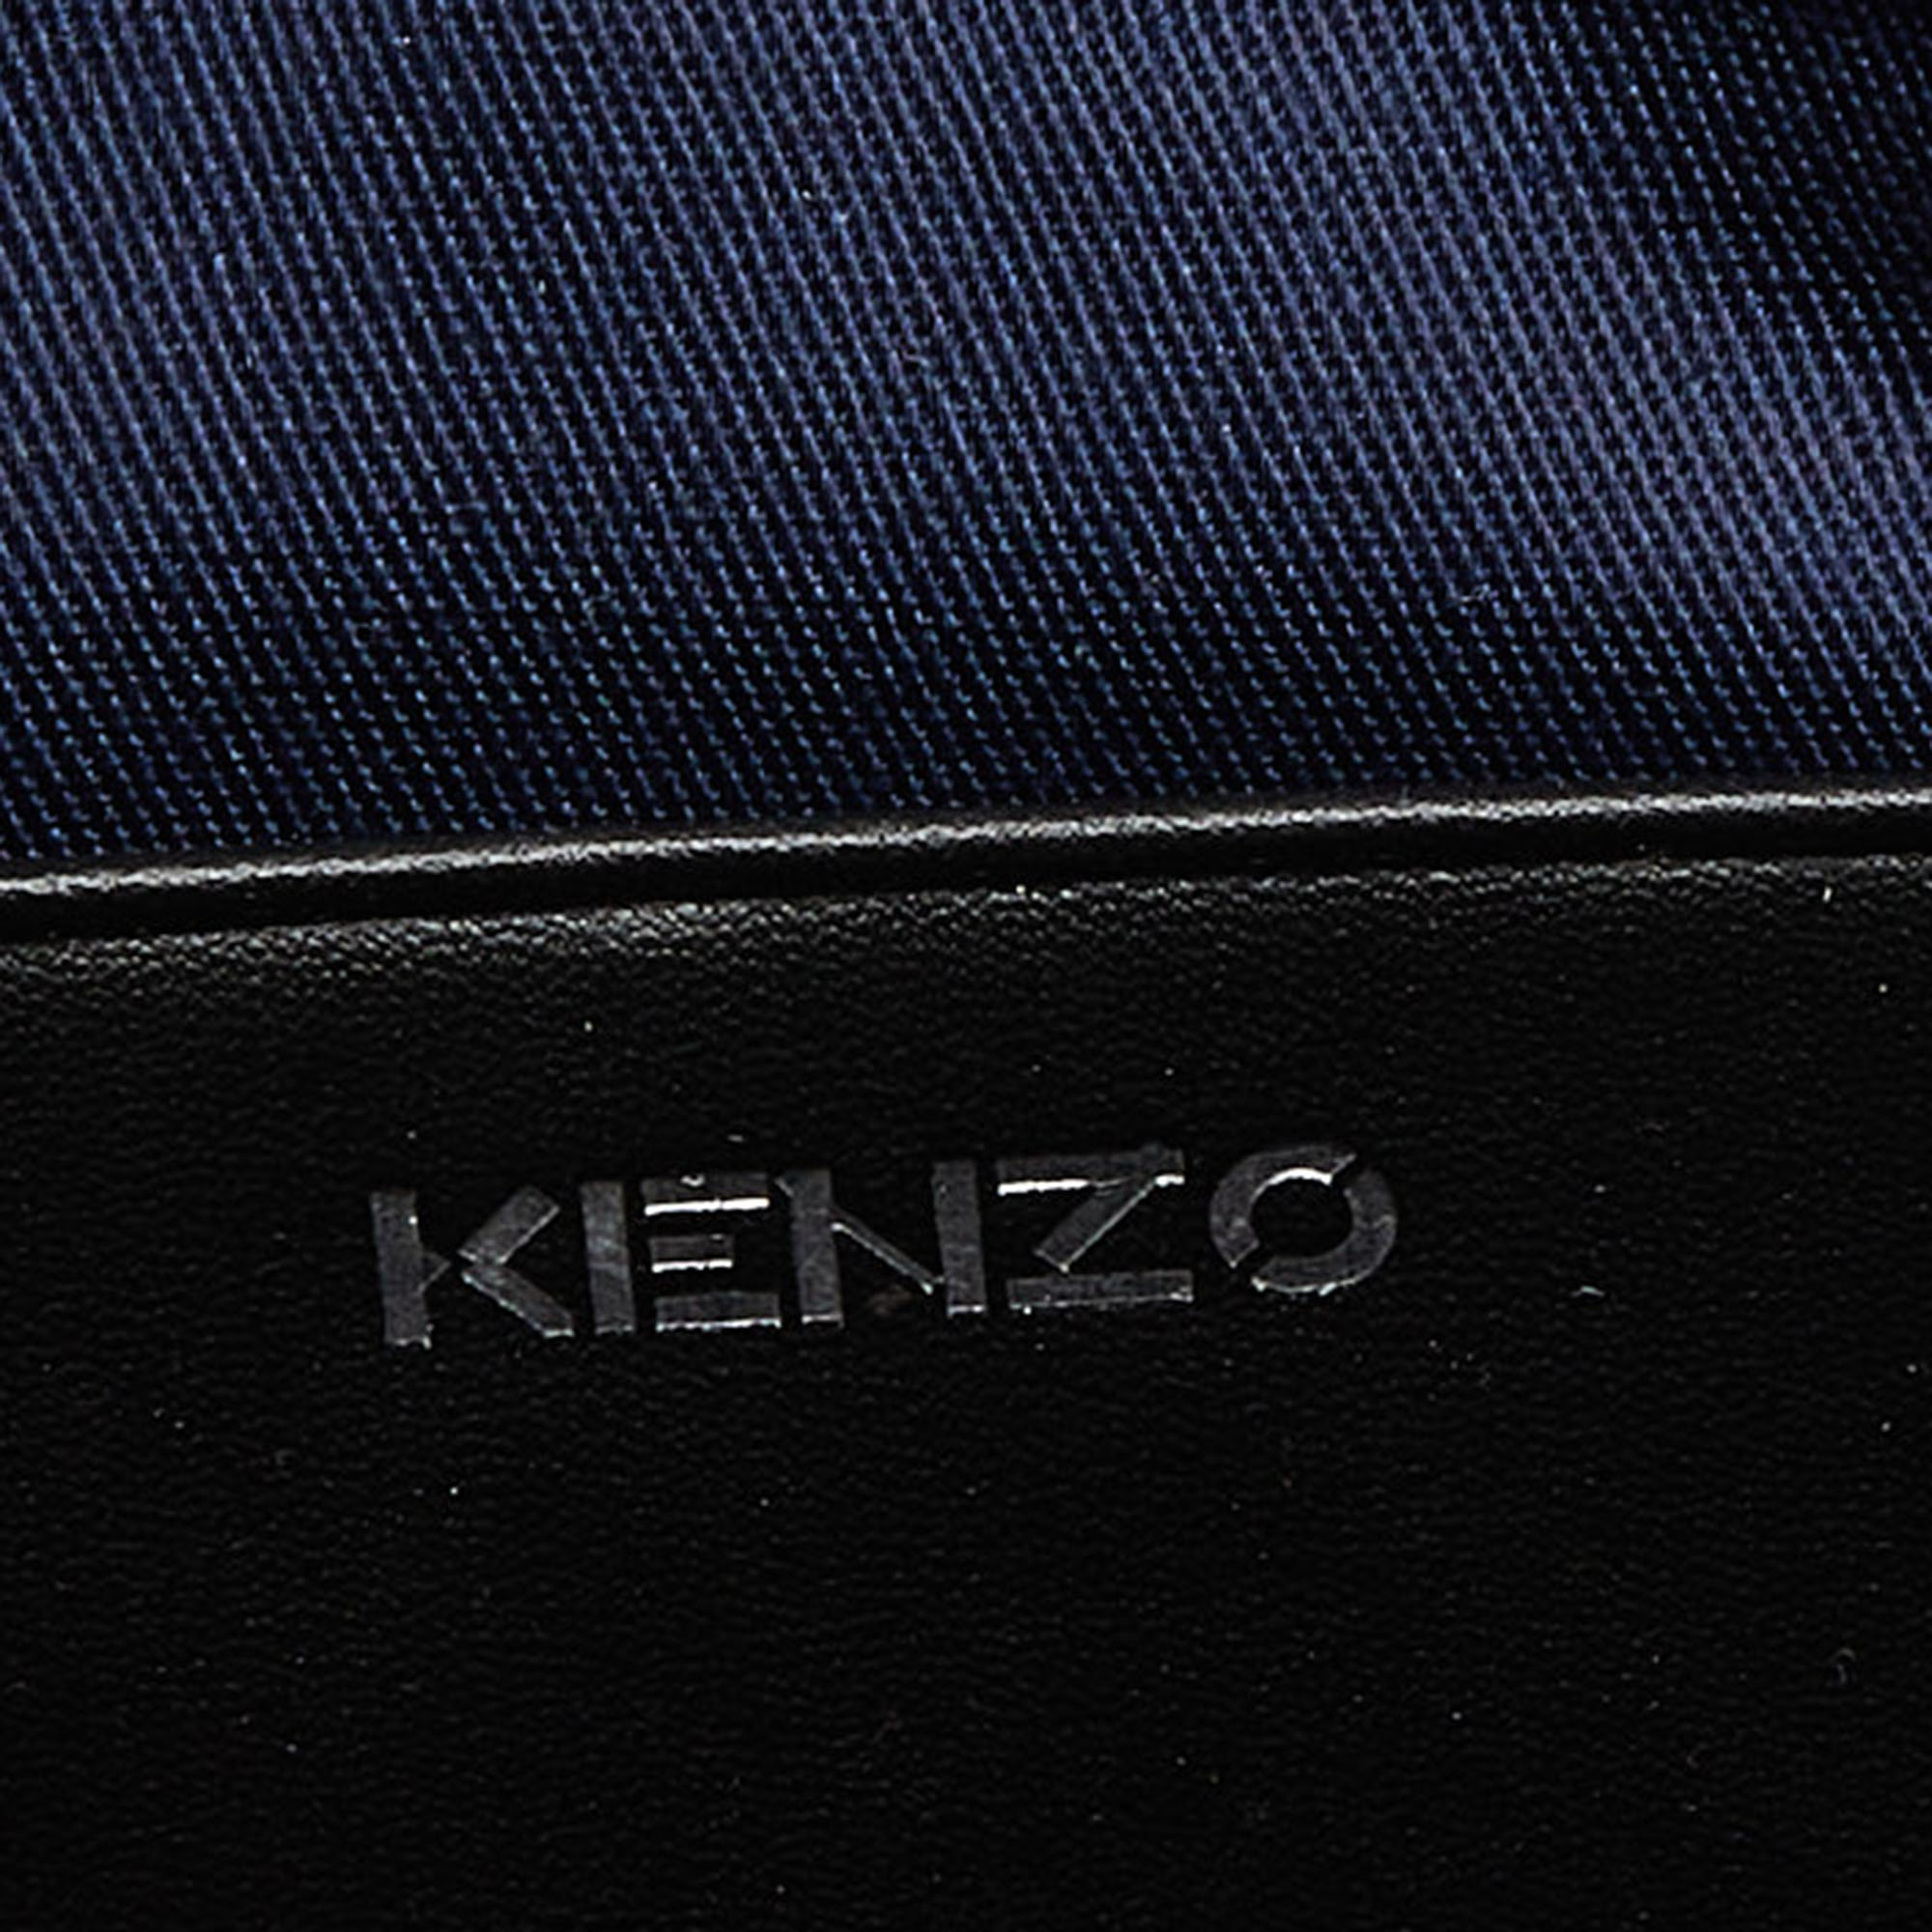 Kenzo Blue/Black Canvas And Leather Messenger Bag